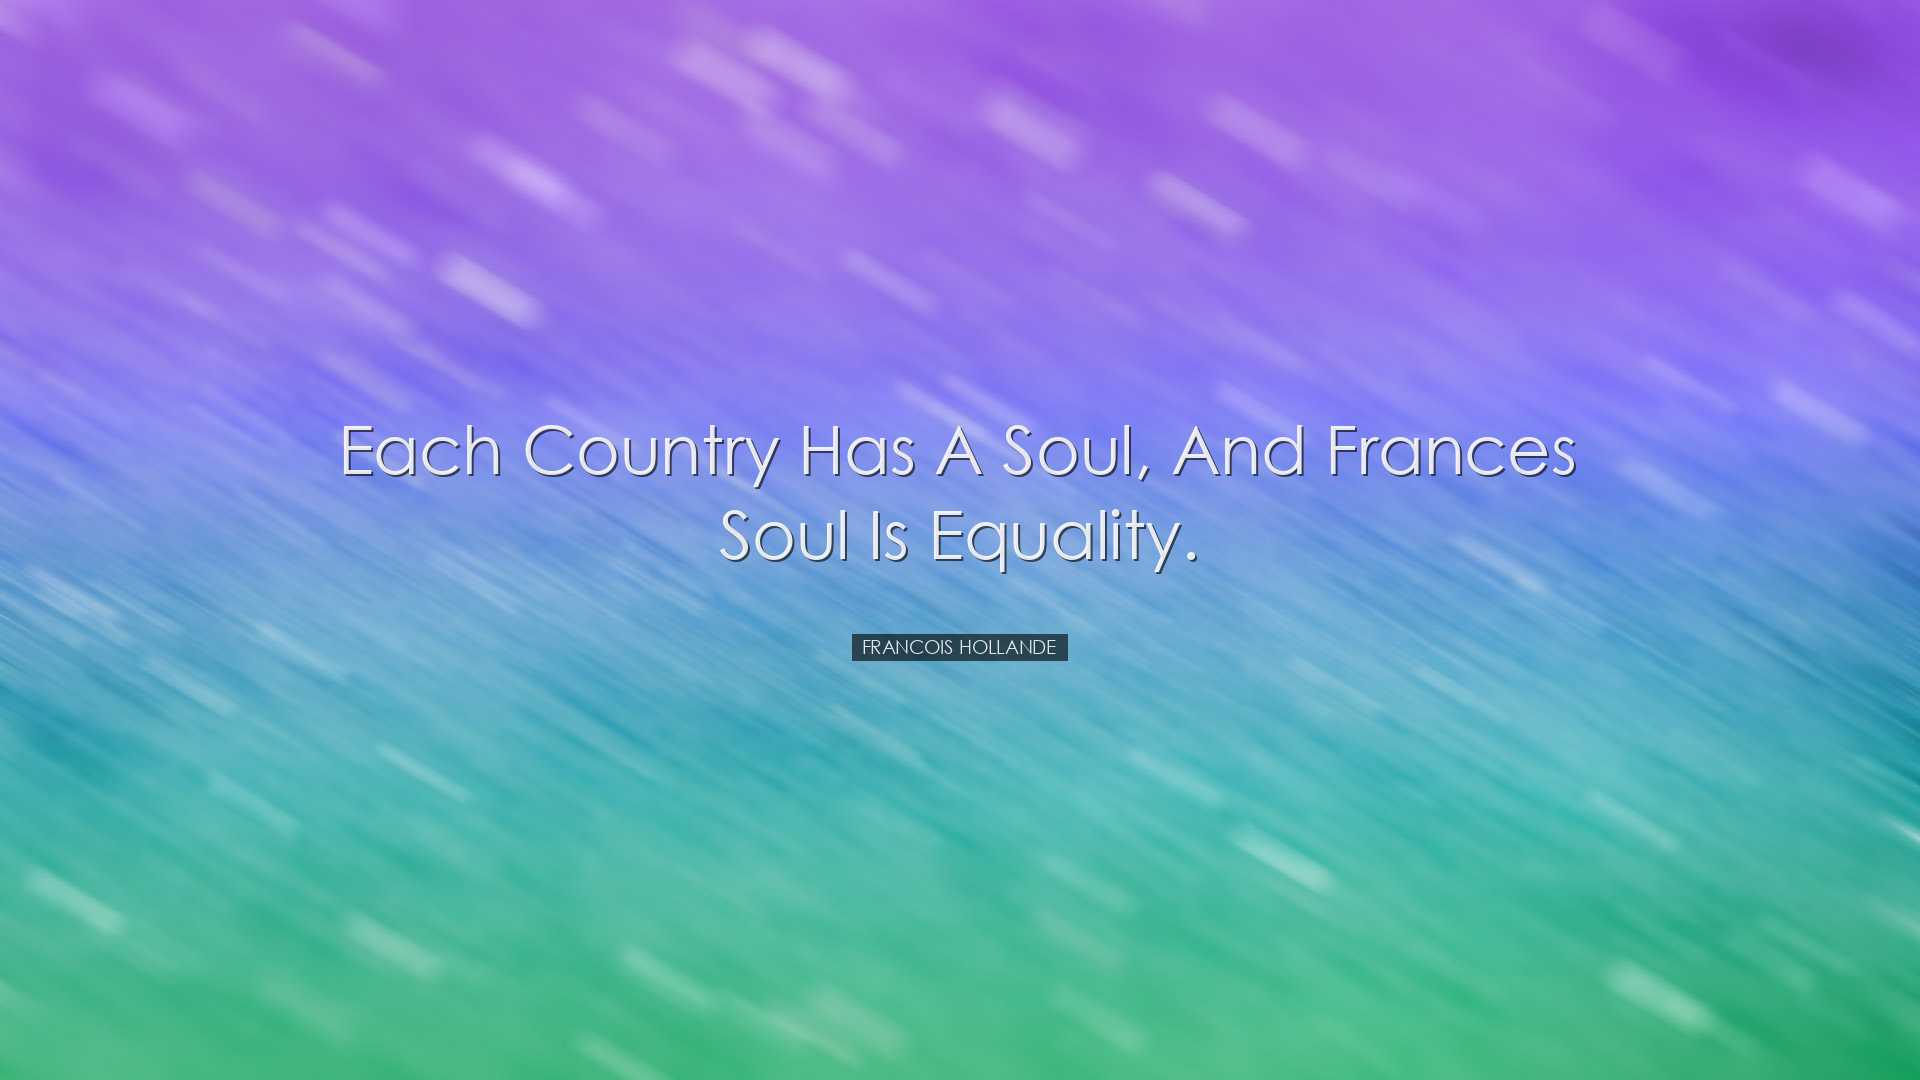 Each country has a soul, and Frances soul is equality. - Francois